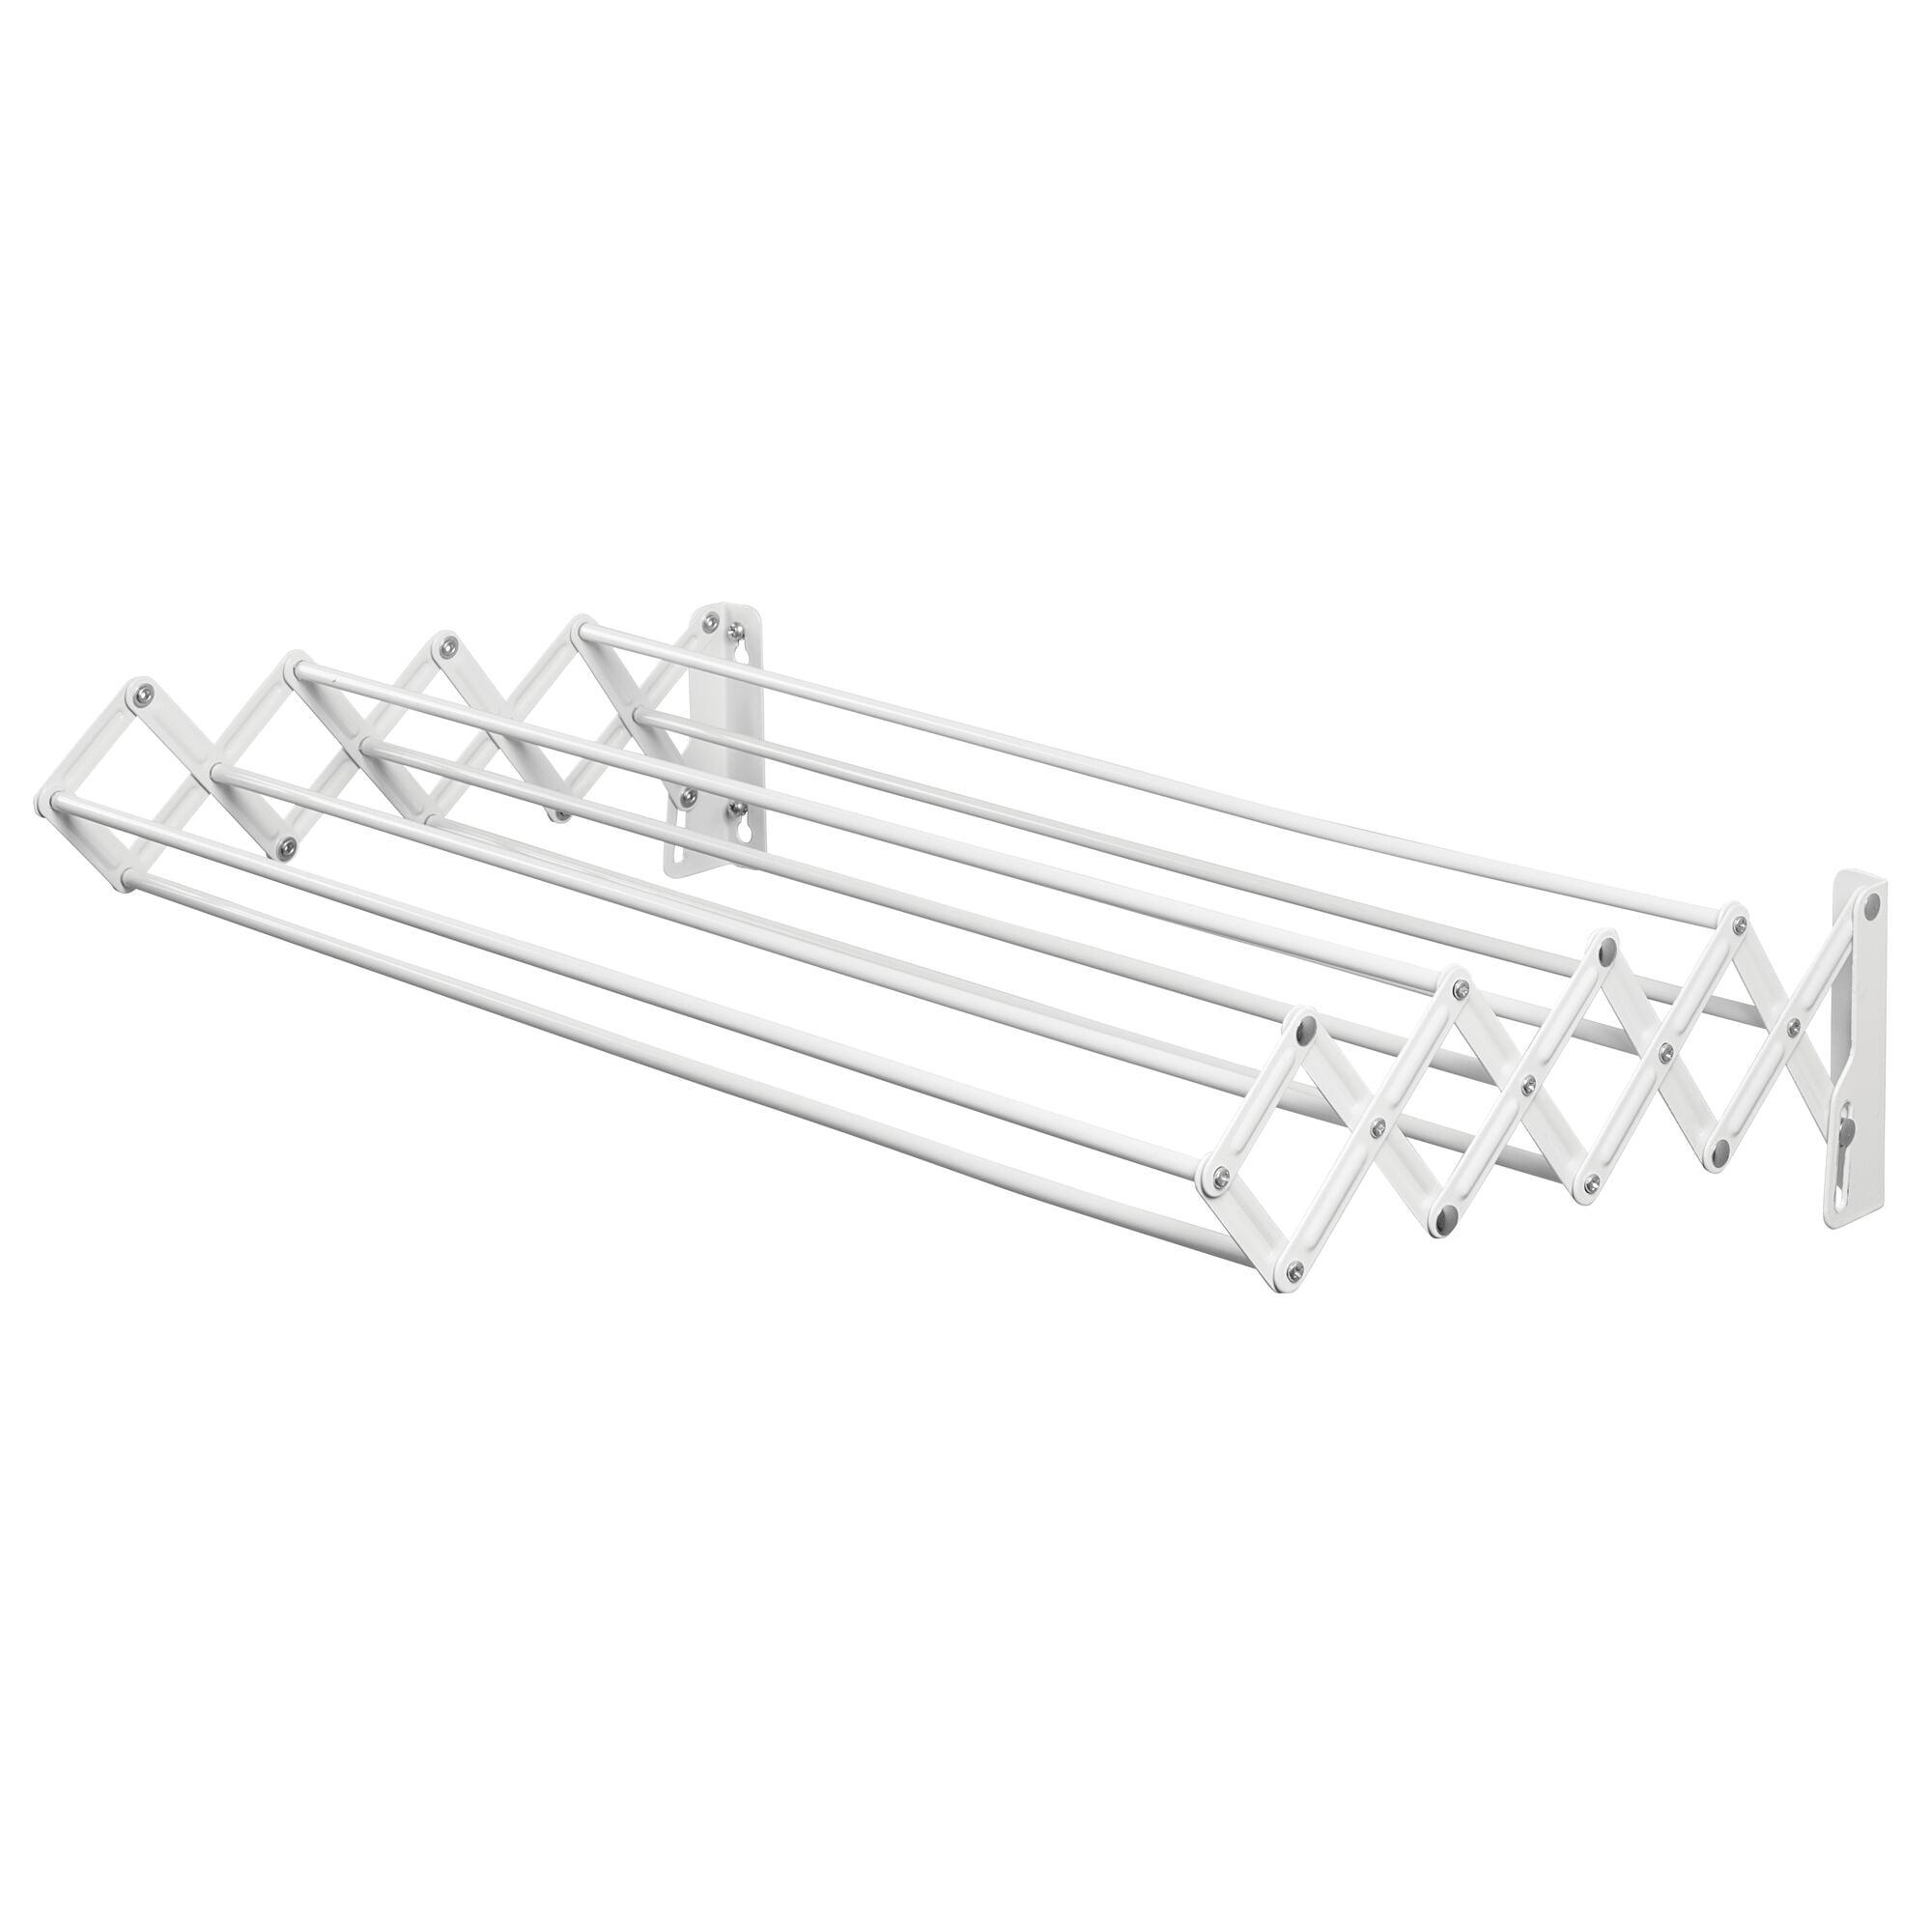 Wall Mount Accordion Laundry Clothes Drying Rack by mDesign